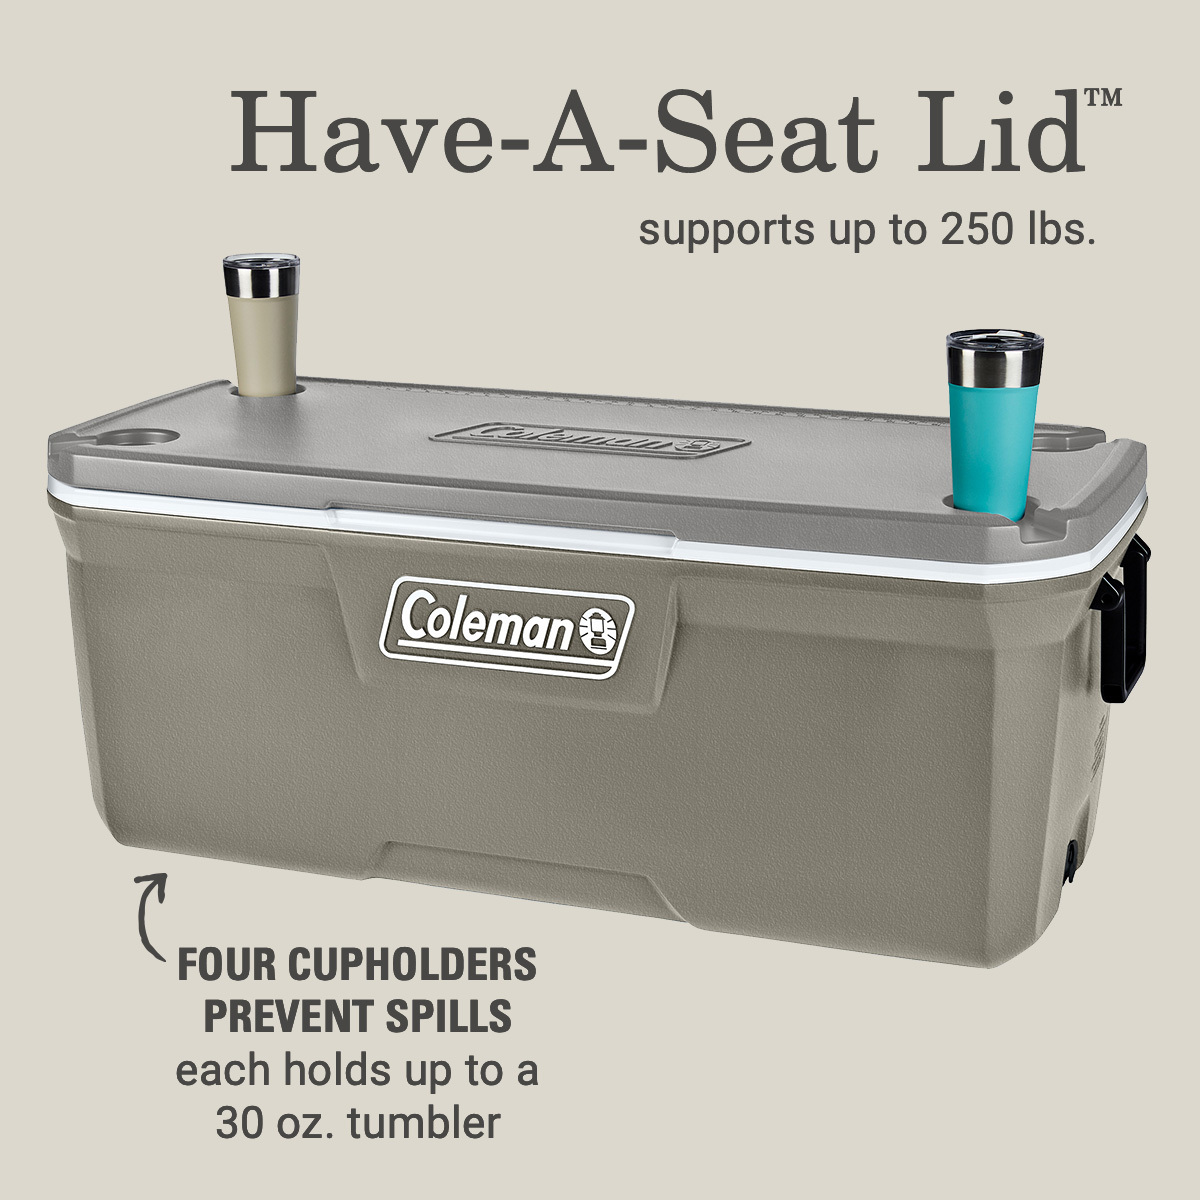 Coleman 316 Series 150QT Hard Chest Cooler, Silver Ash - image 4 of 8